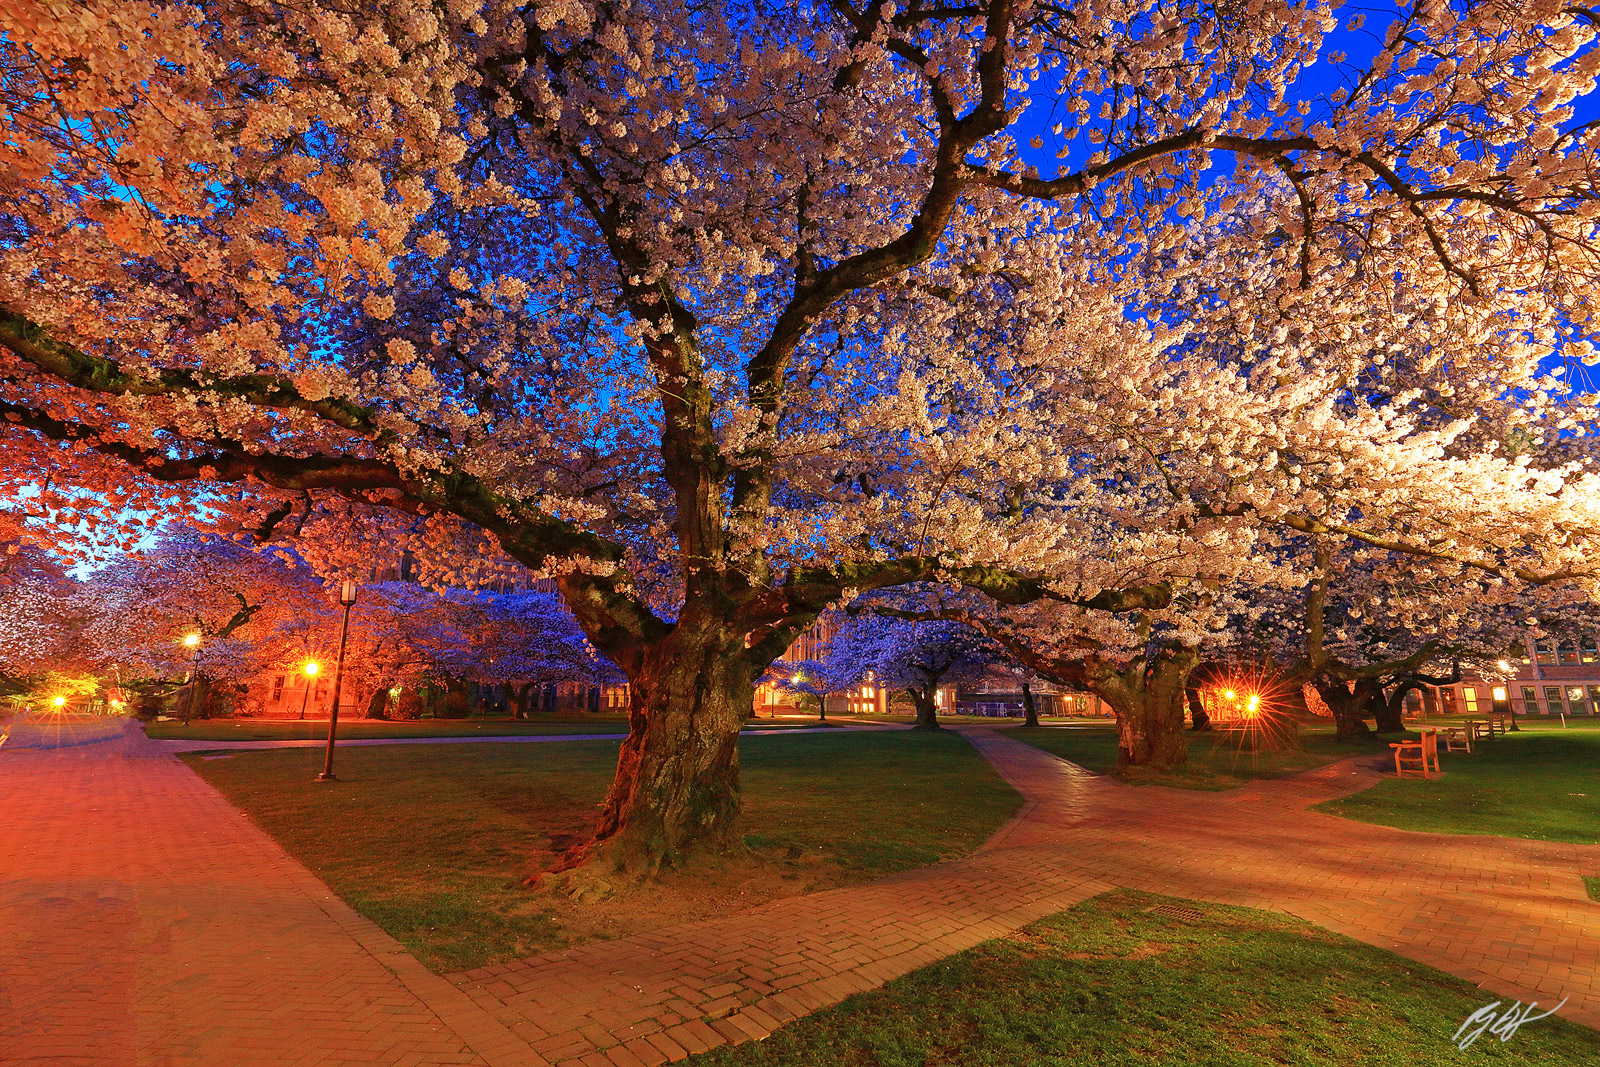 Cherry trees in Bloom in the University of Washington Quad in Seattle, Washington